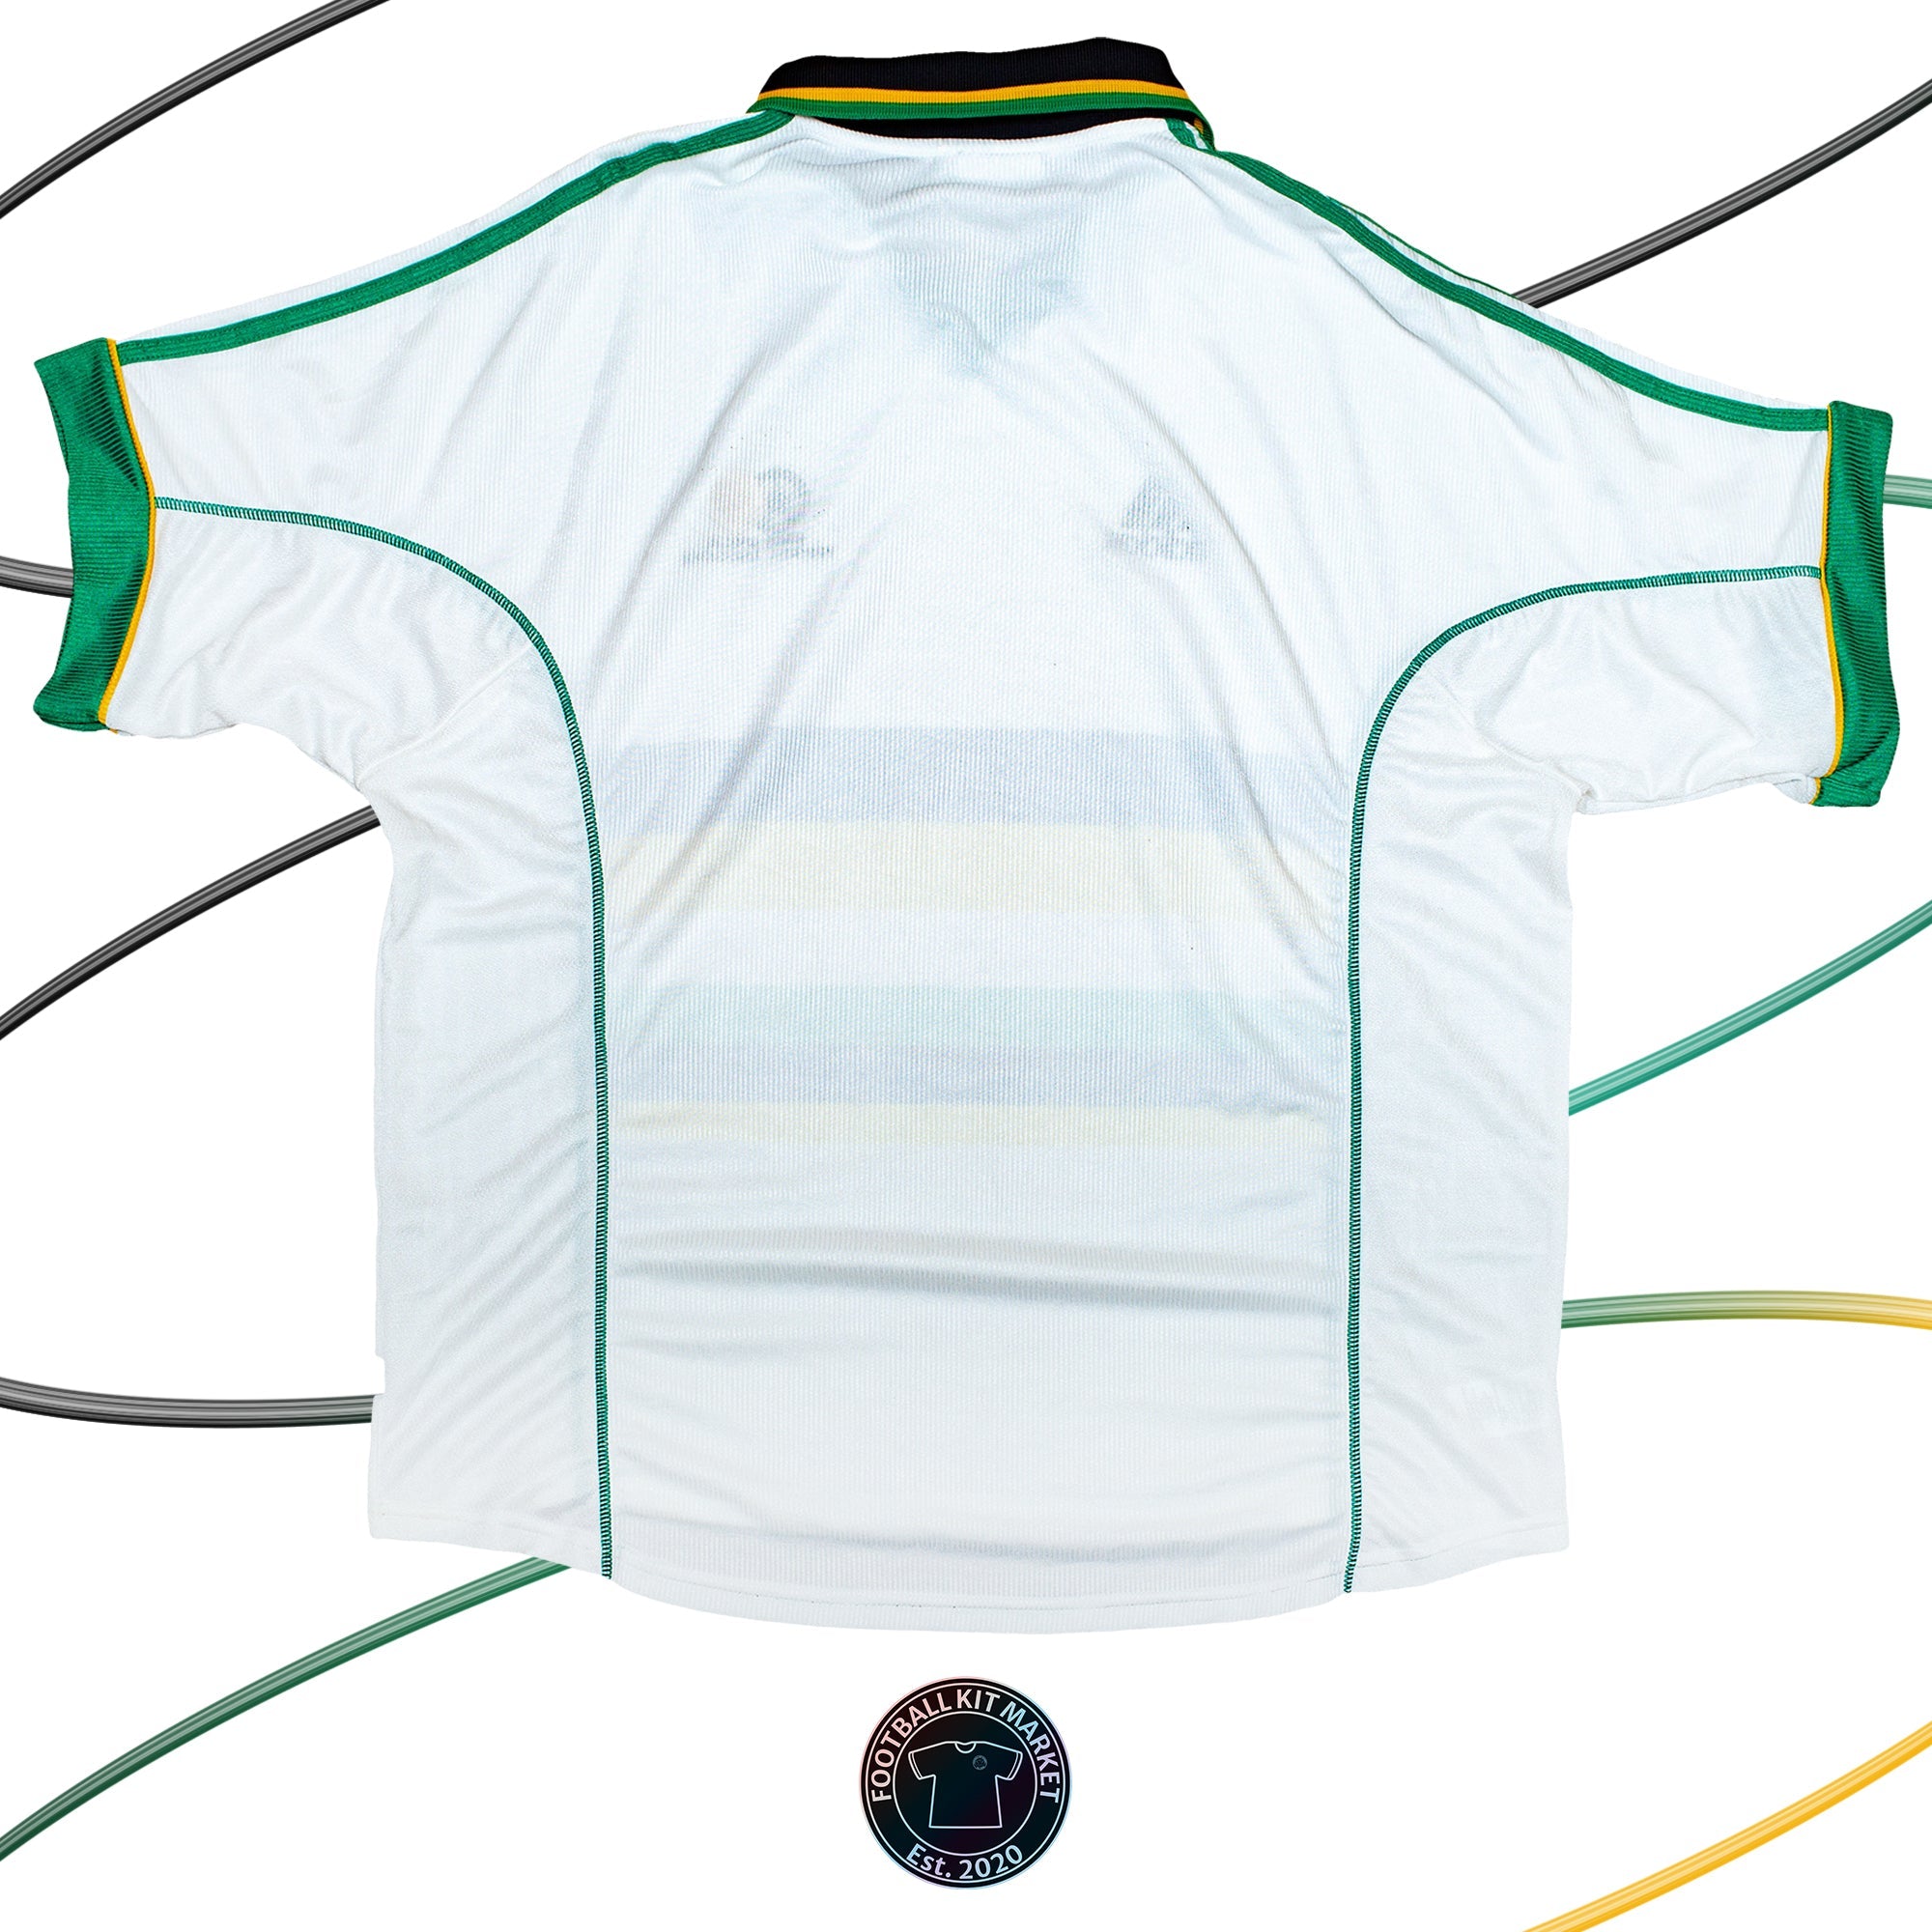 Genuine SOUTH AFRICA Home Shirt (1999-2000) - ADIDAS (XXL) - Product Image from Football Kit Market